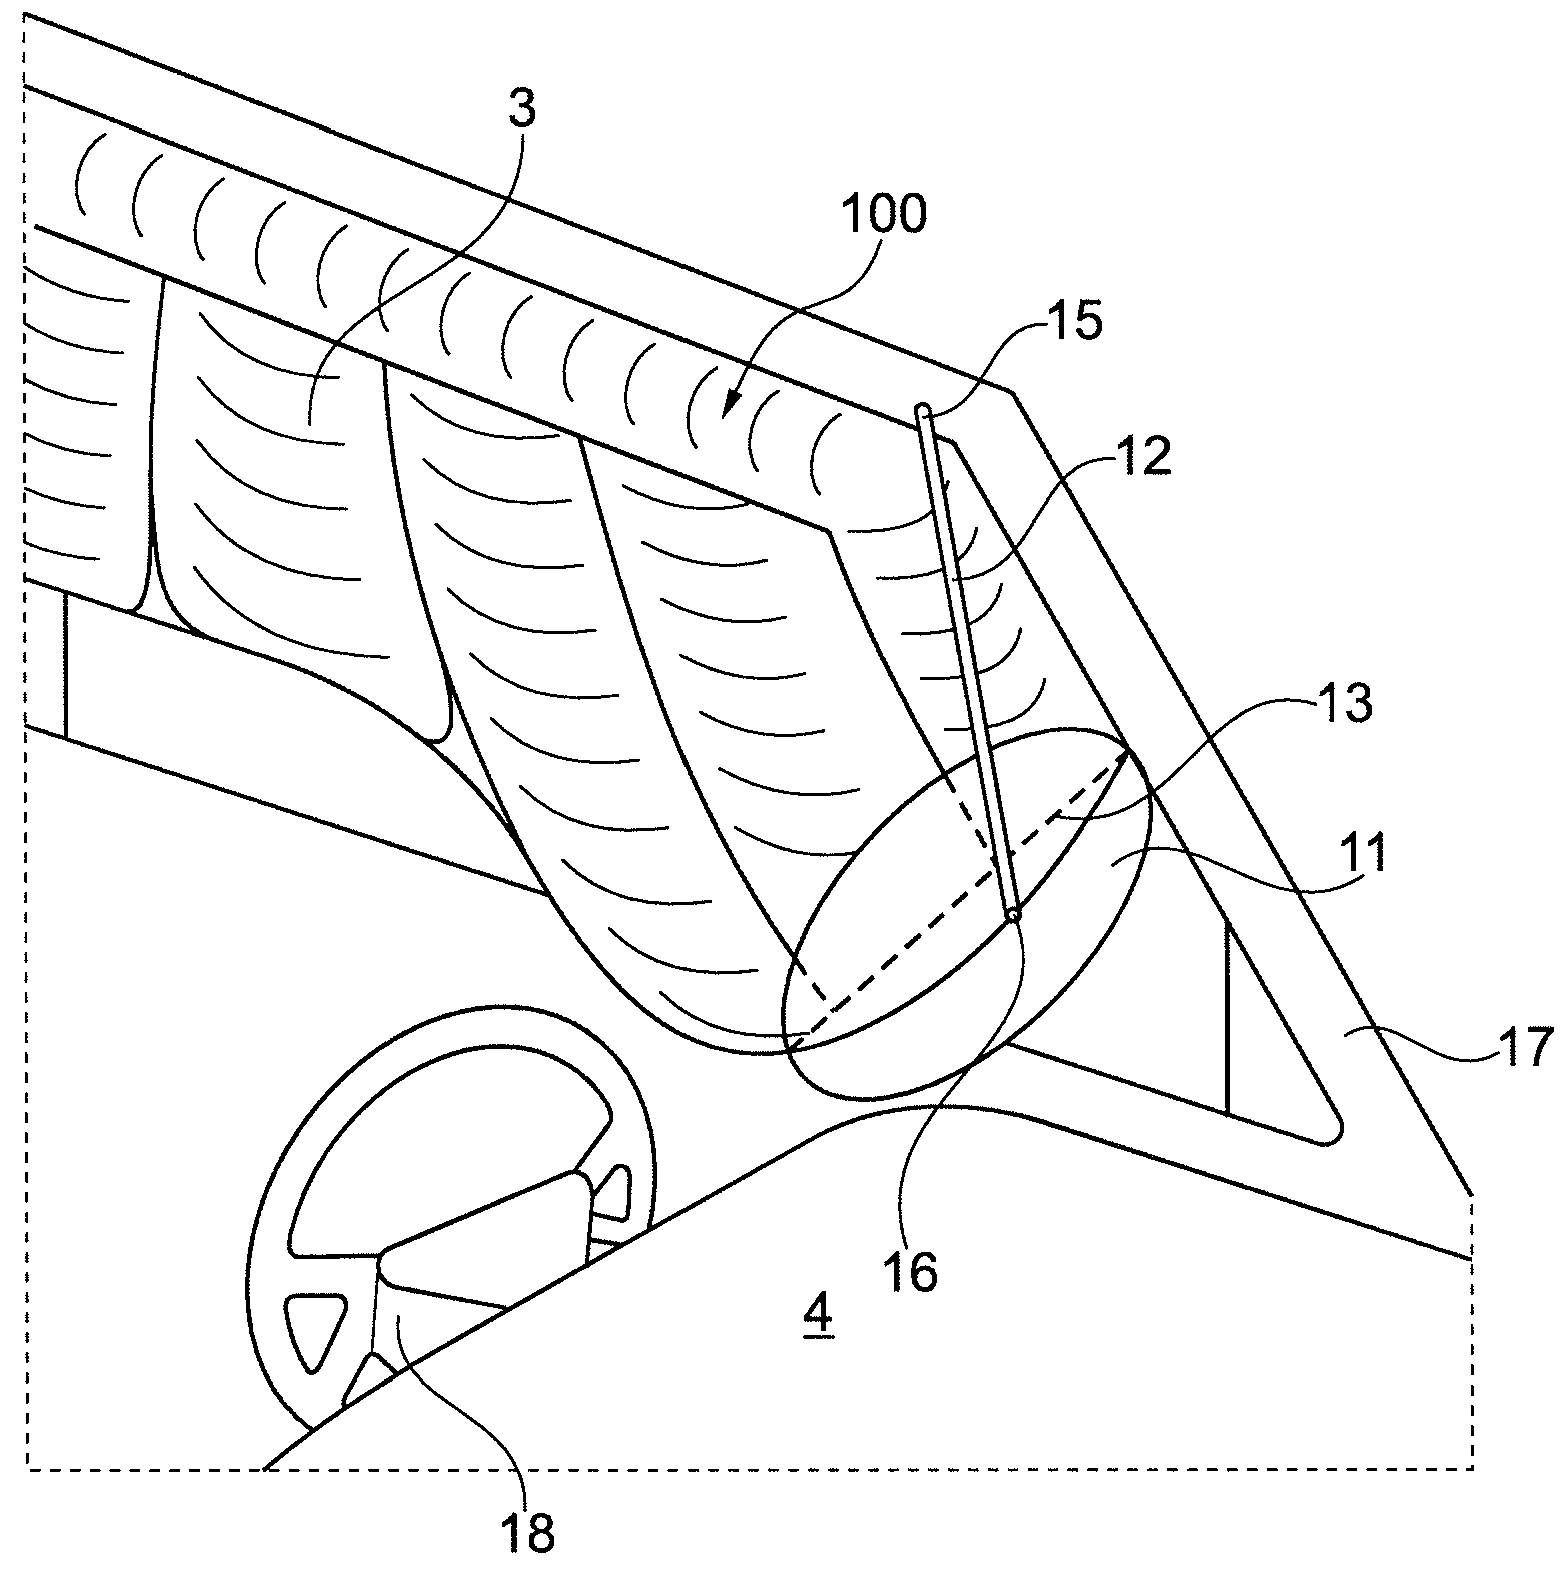 Curtain airbag for a vehicle